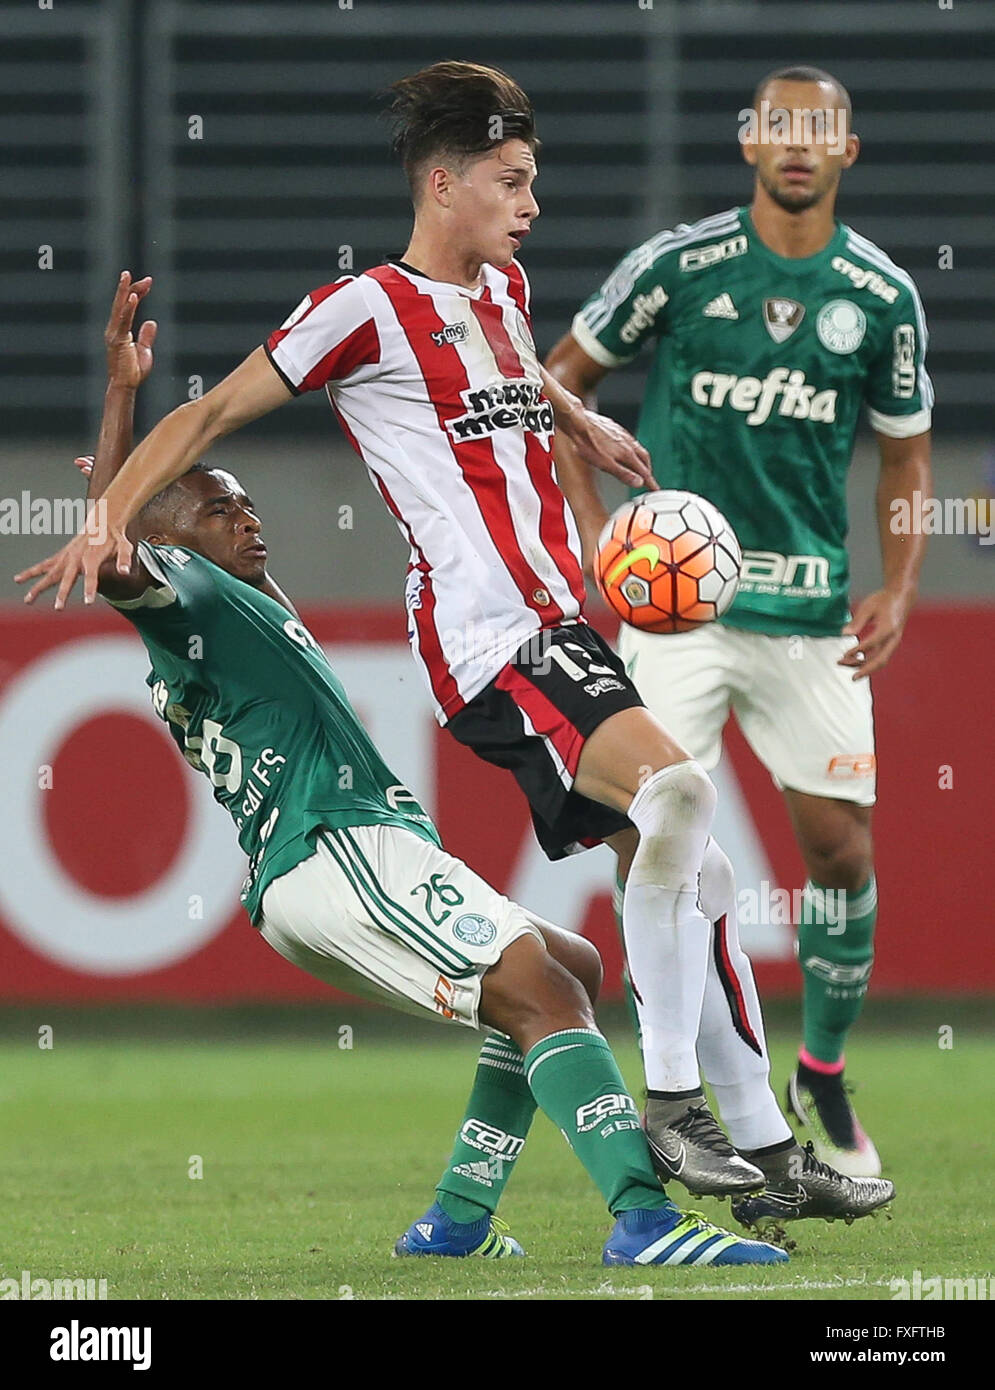 SAO PAULO, Brazil - 14/04/2016: PALM RIVER PLATE X URU - The Allione  player, SE Palmeiras, celebrates his goal against CA River Plate team,  during match valid for the sixth round of